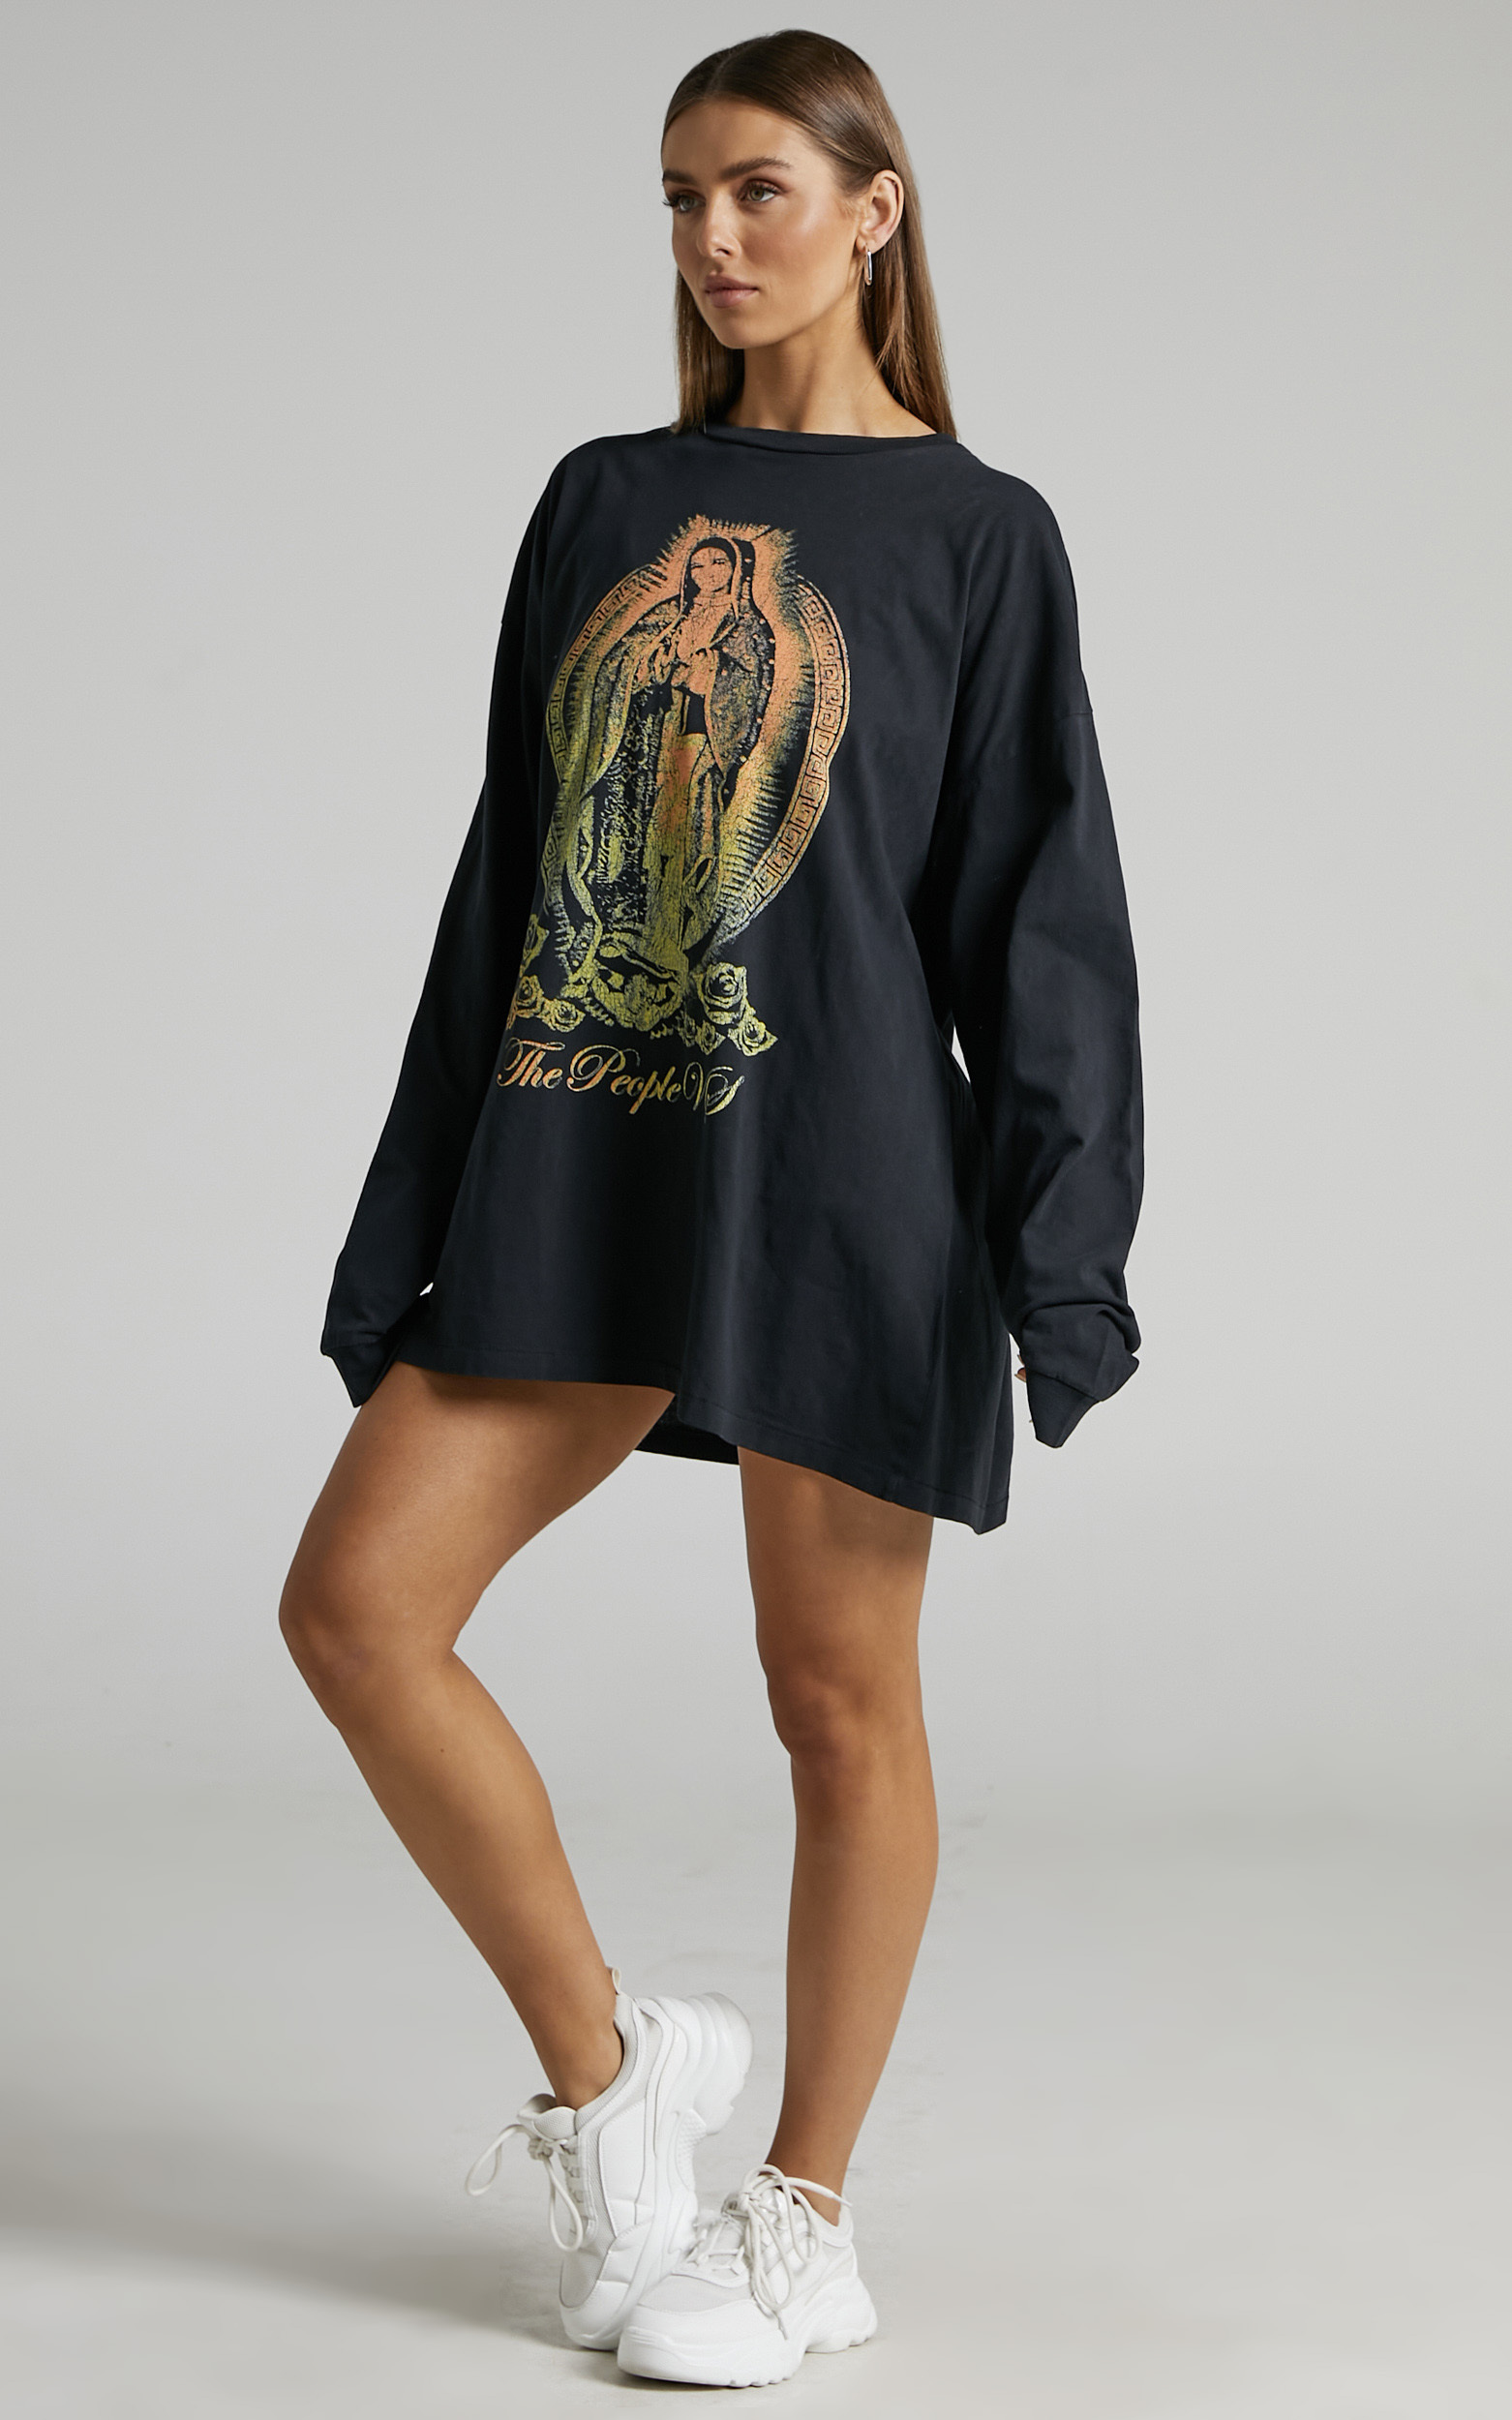 The People Vs - Blessed Long Sleeve Tee Dress in Ultra Black - L, BLK1, hi-res image number null